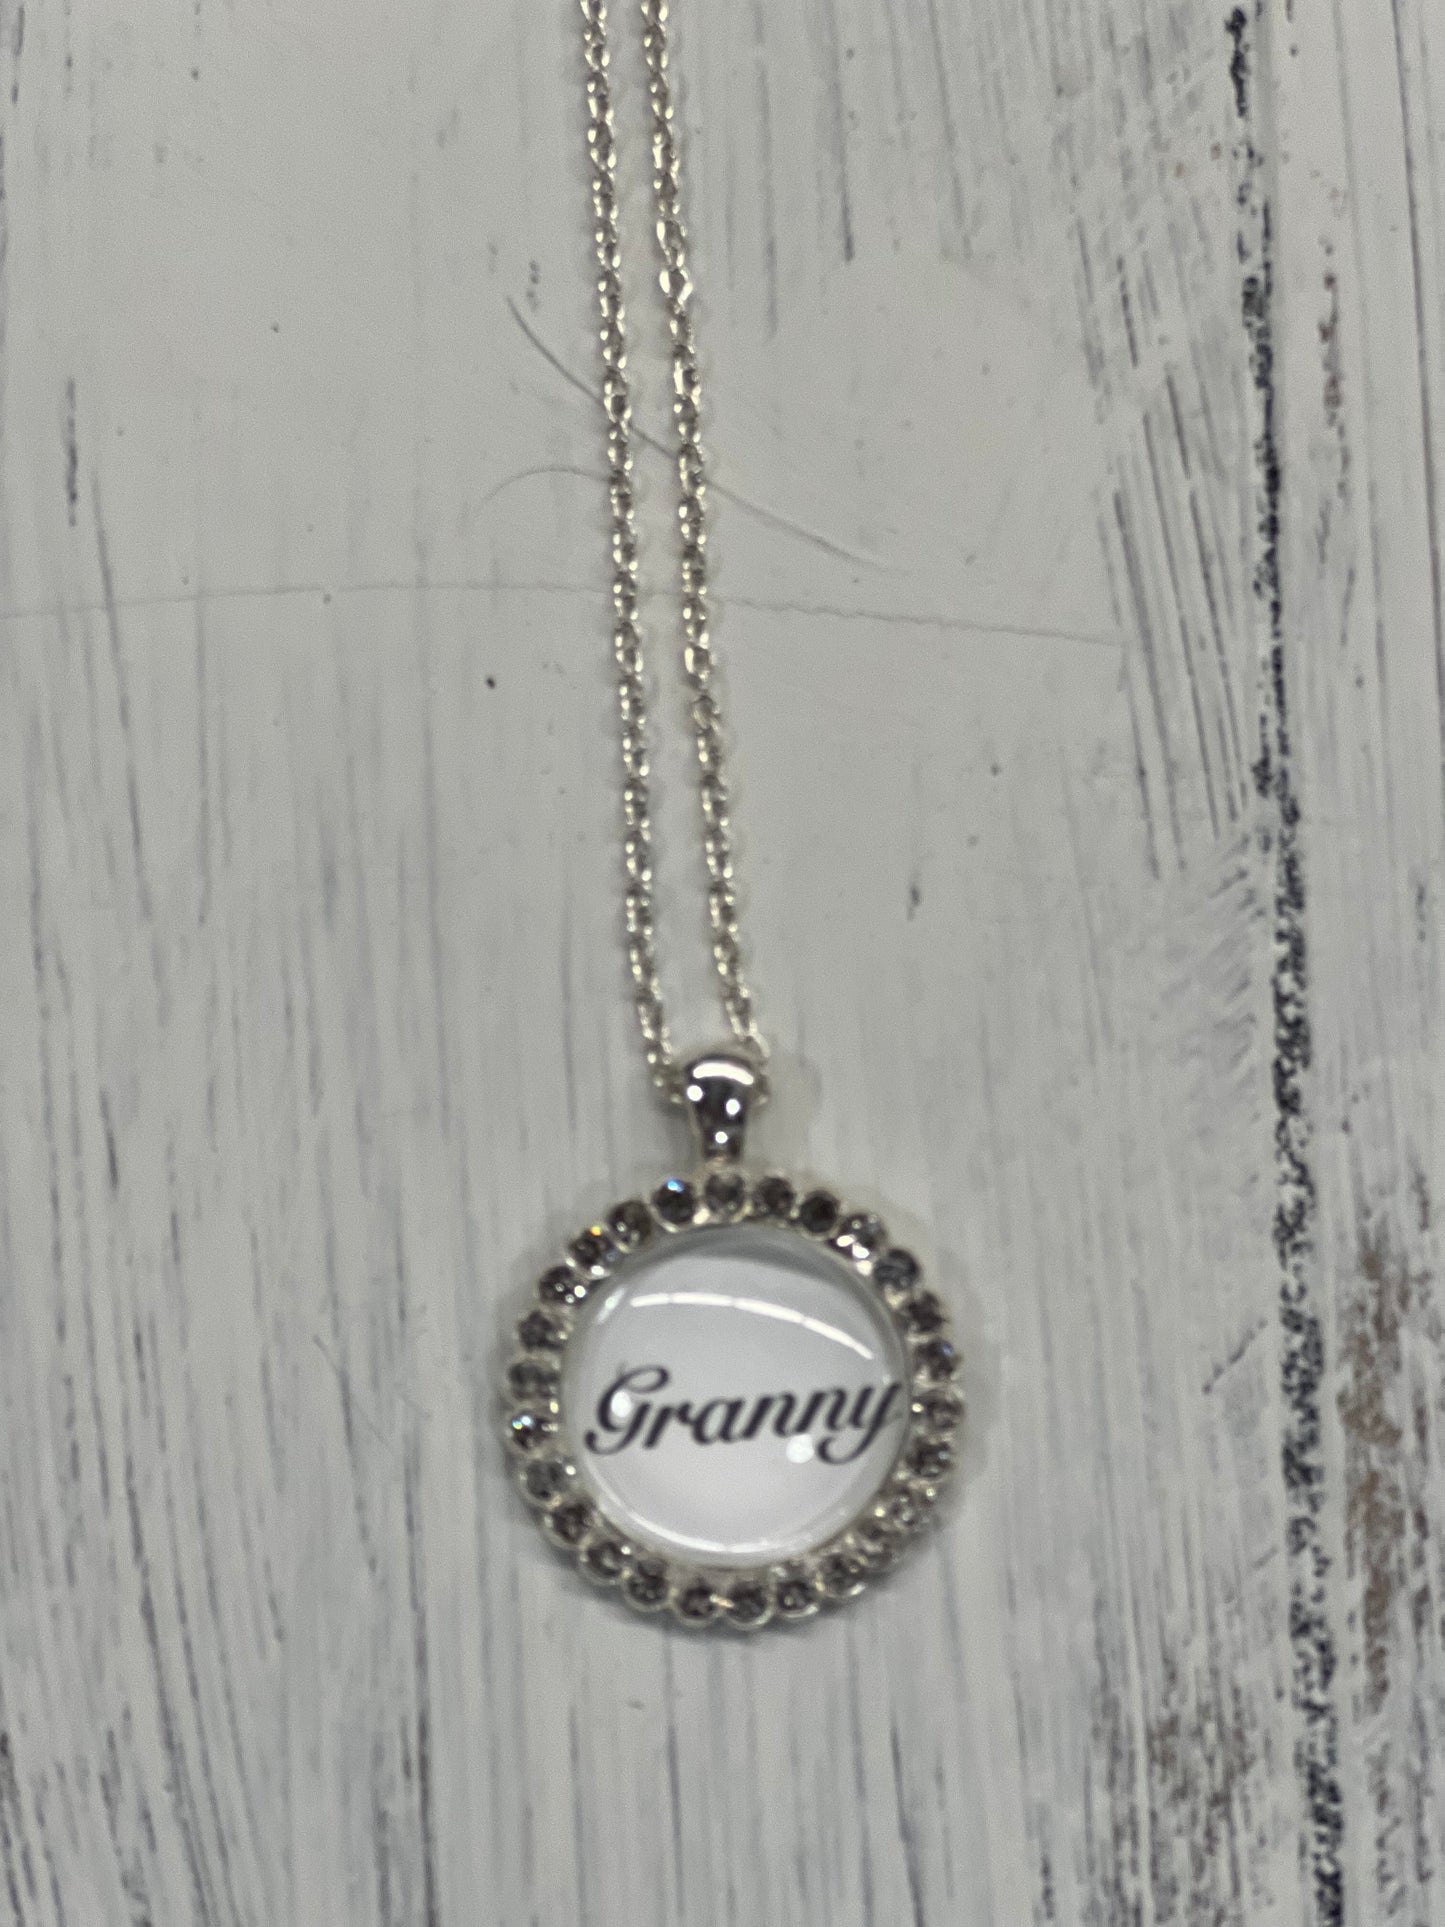 Silver Mother/Grandmother necklaces